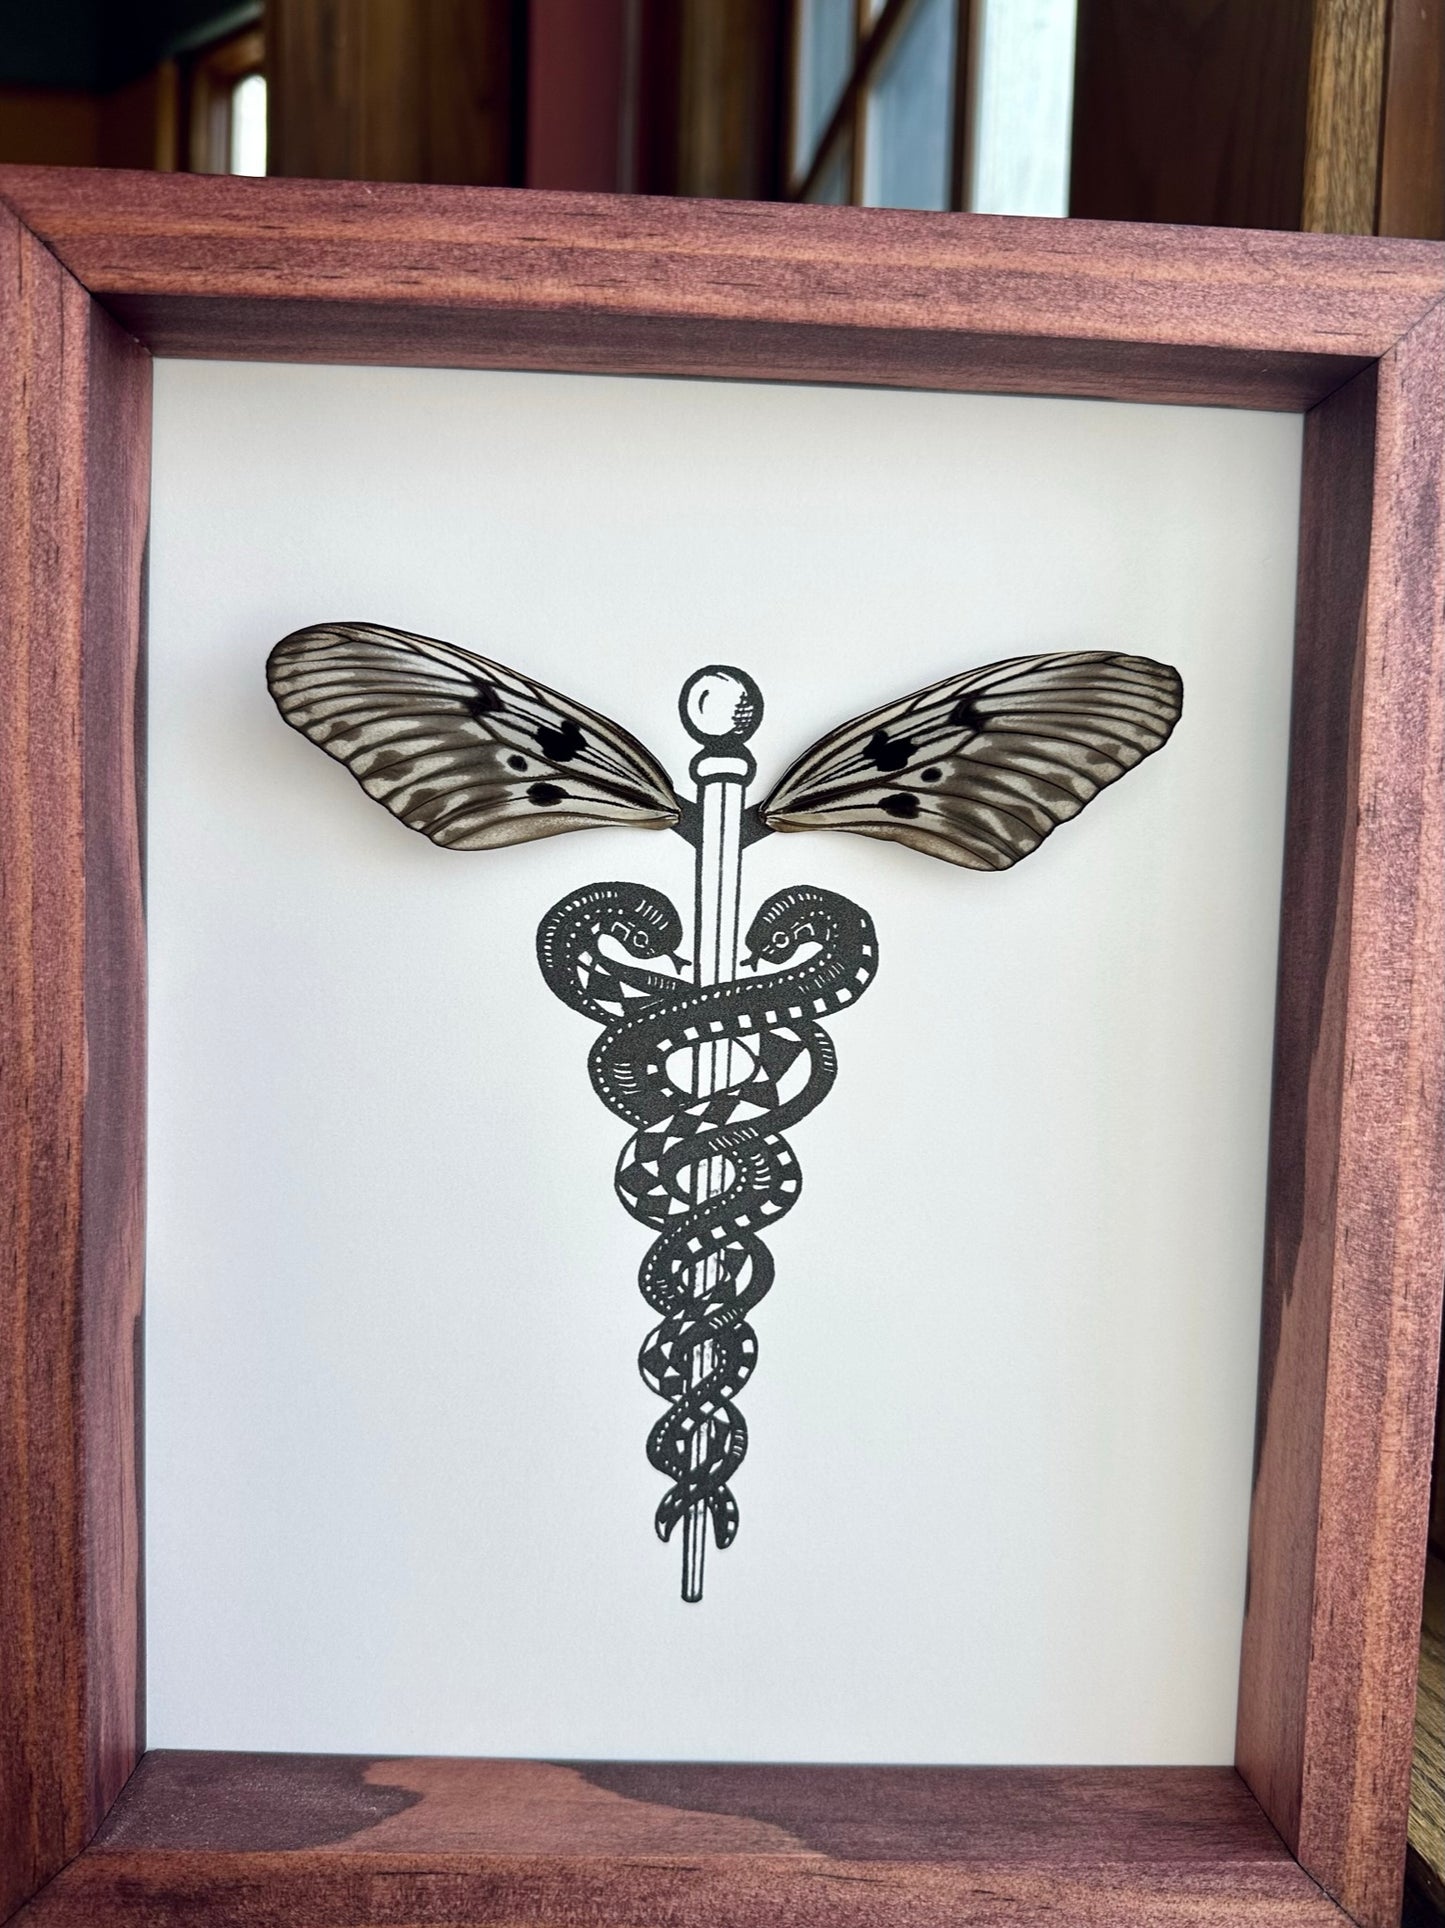 Caduceus Medical Symbol Real Butterfly Wings Art Ethically Sourced Made in MN USA - Holly Ulm - Isms Butterfly Conservation Art